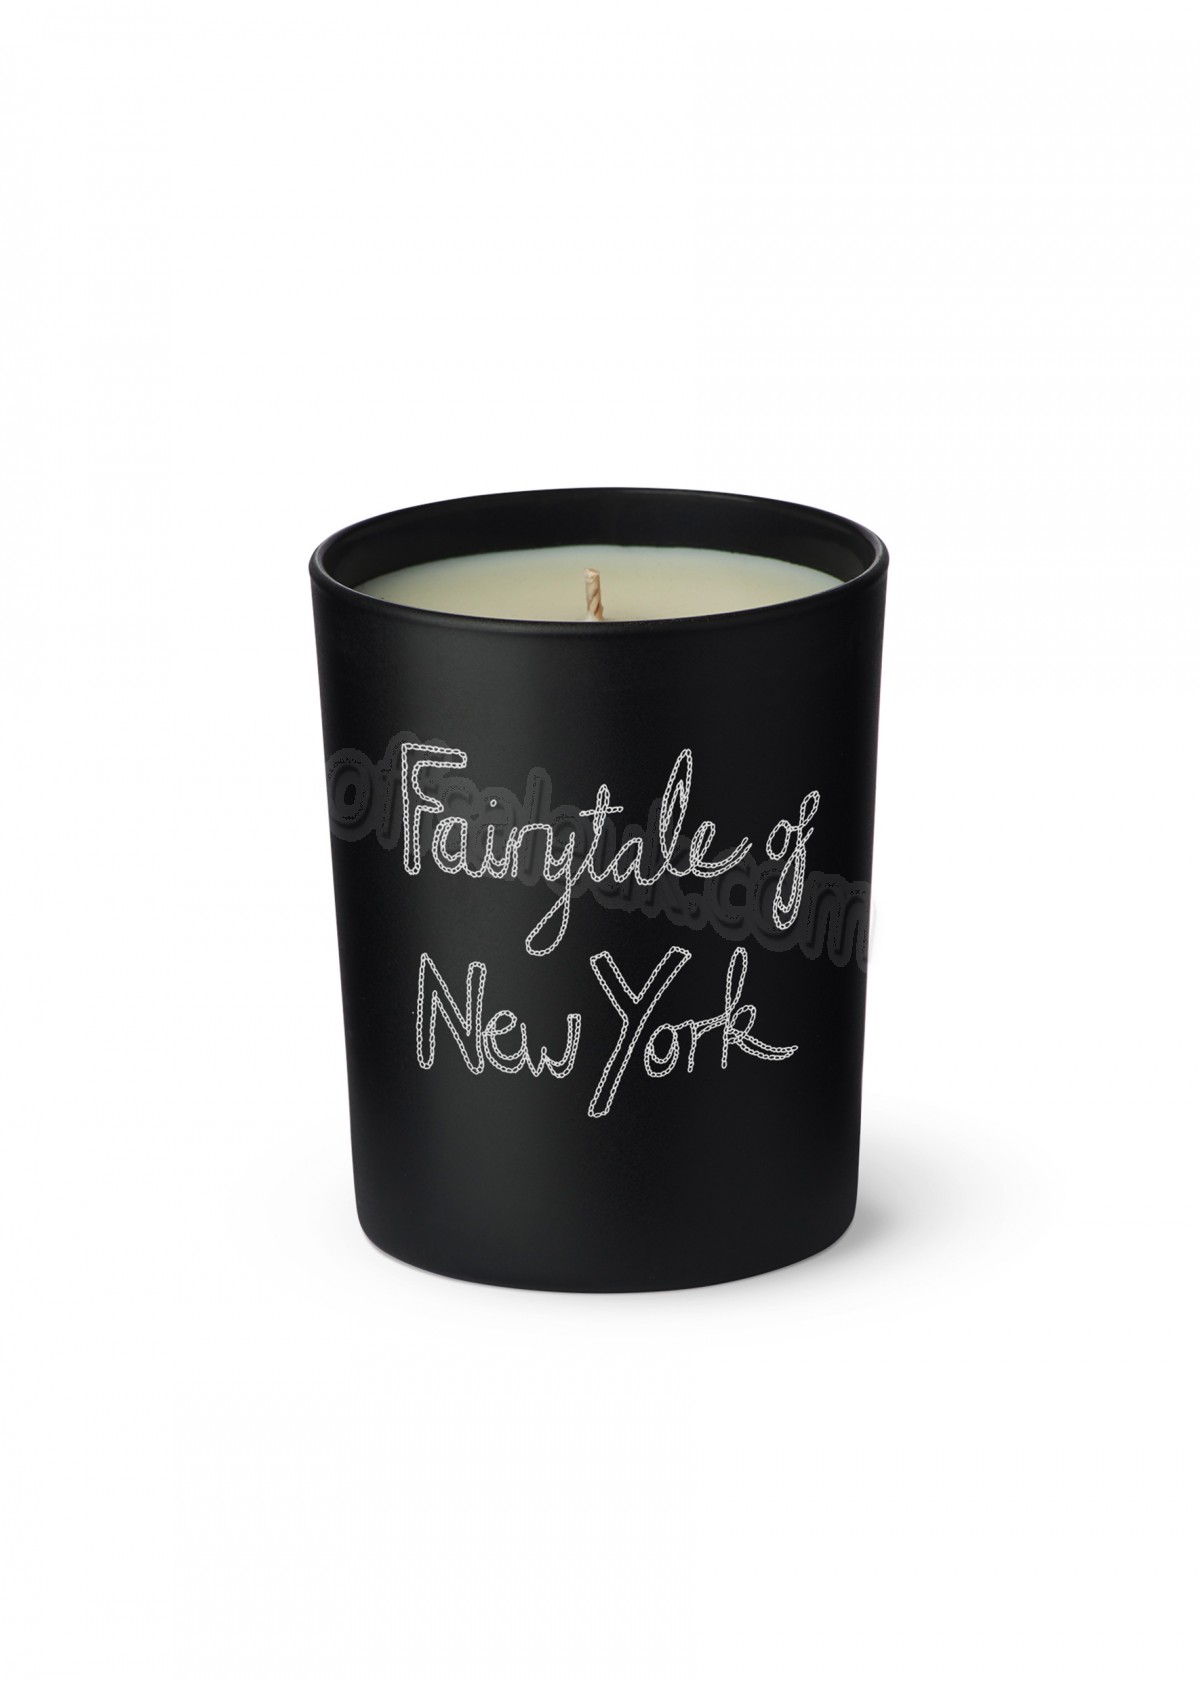 Cheap Fairytale of New York Candle - -0